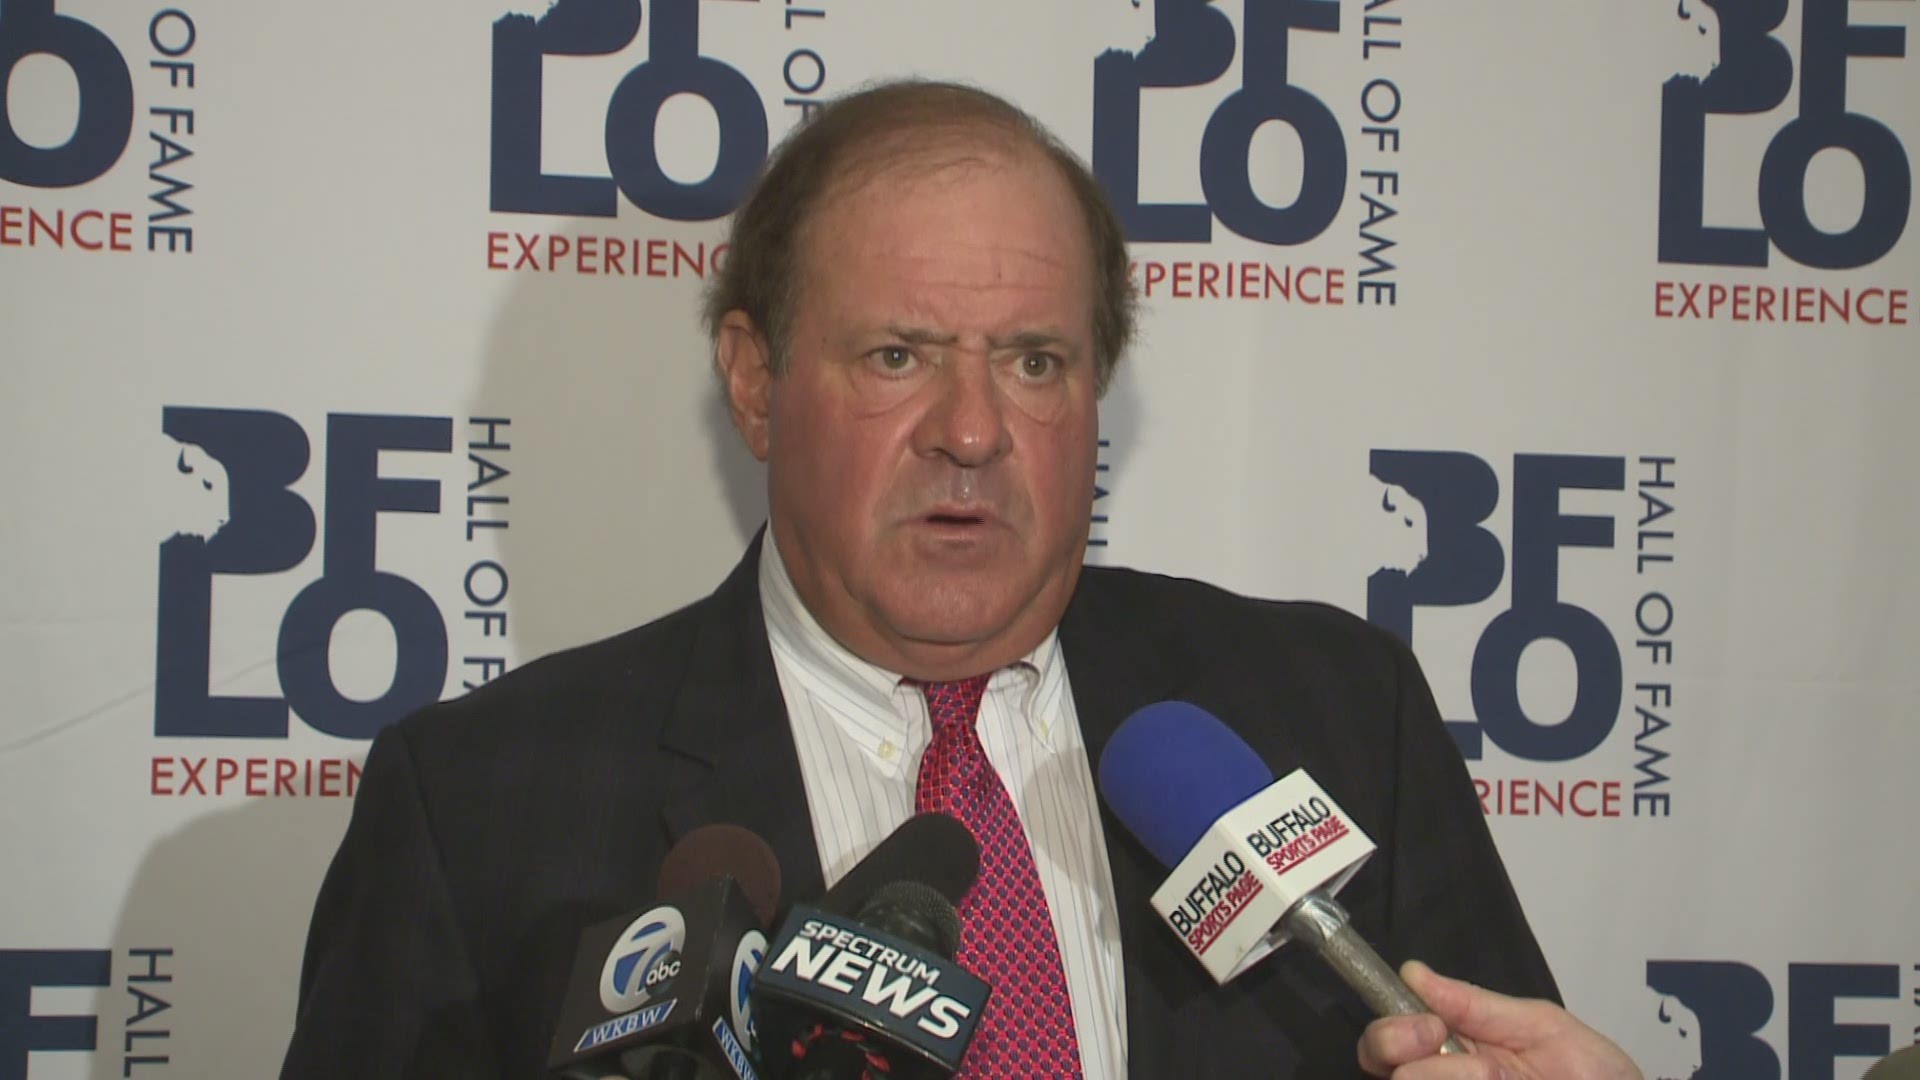 Chris Berman speaks to the media at Buffalo Hall of Fame Experience Fundraiser